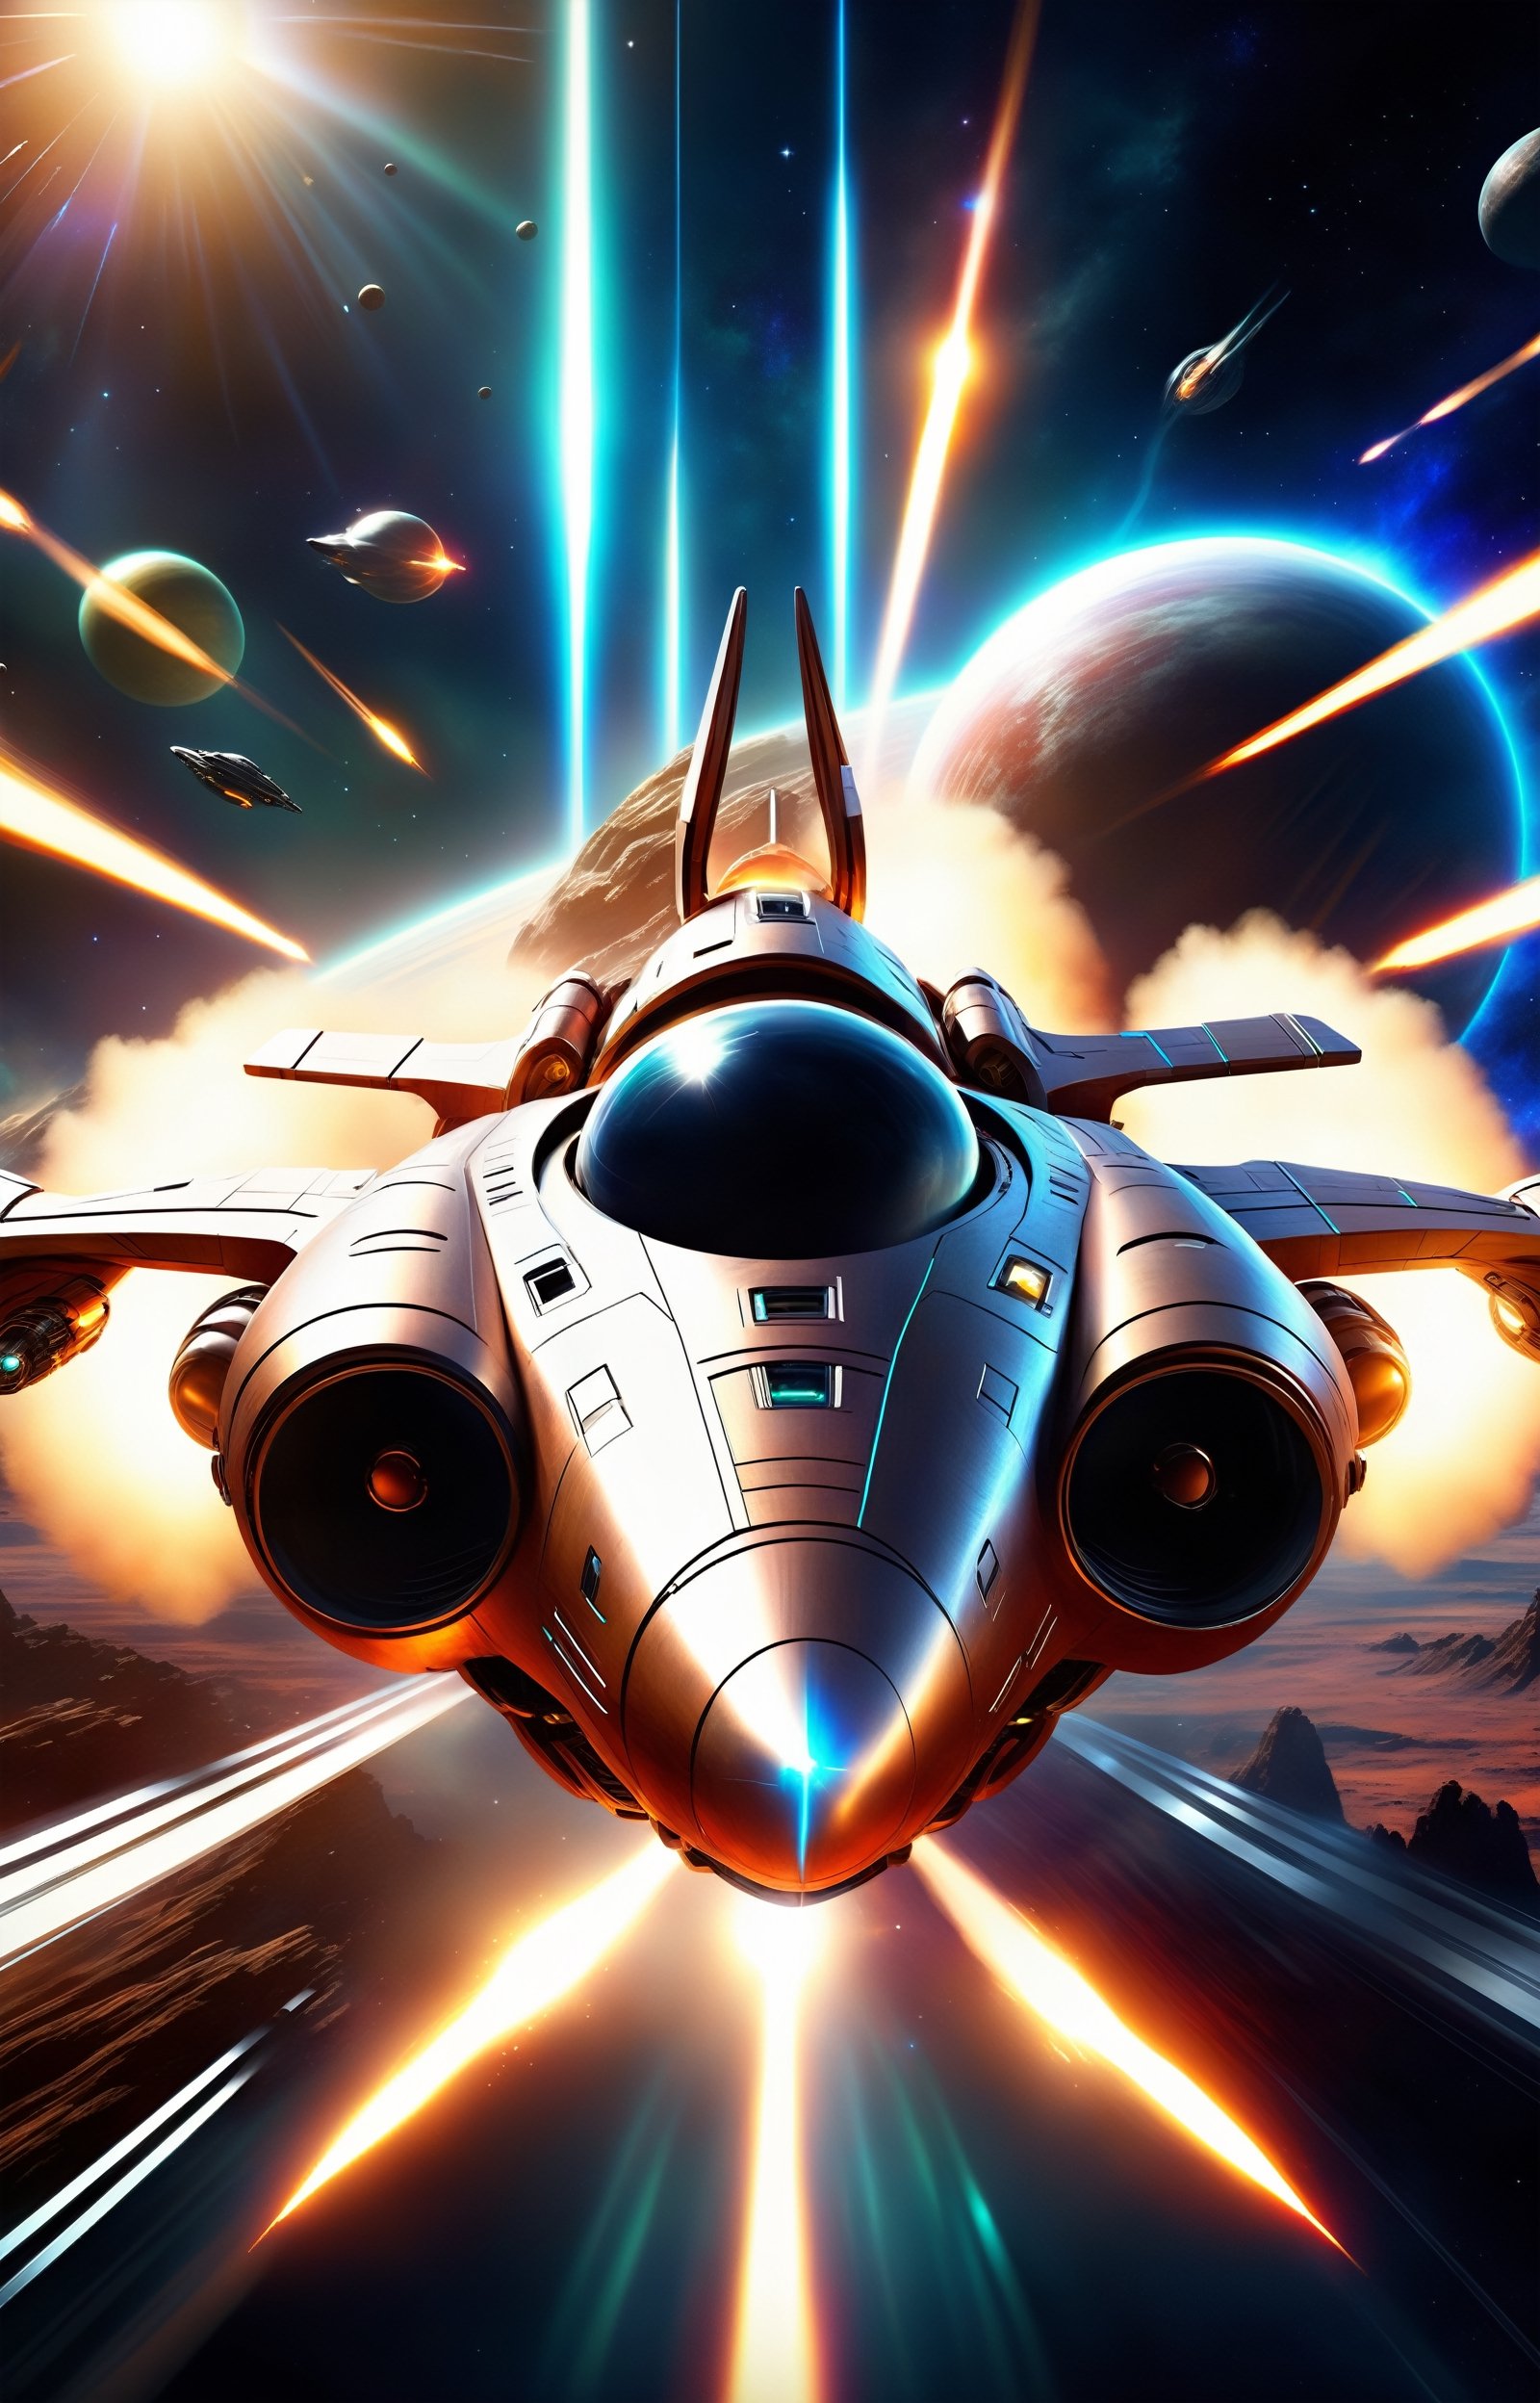 (best quality,4k,8k,highres,masterpiece:1.2),ultra-detailed,realistic, futuristic sky, vibrant colors, sci-fi style, shining engines, fast-paced action, dynamic composition, futuristic spaceship, interstellar travel, deep space, intense energy, starry background, streaks of light, blazing trails, high-tech cockpit, state-of-the-art technology, sleek design, sci-fi atmosphere, motion blur in starship, dynamic motion lines, thrilling adventure, epic journey, exhilarating speed, immersive experience, breathtaking scene, awe-inspiring visuals.